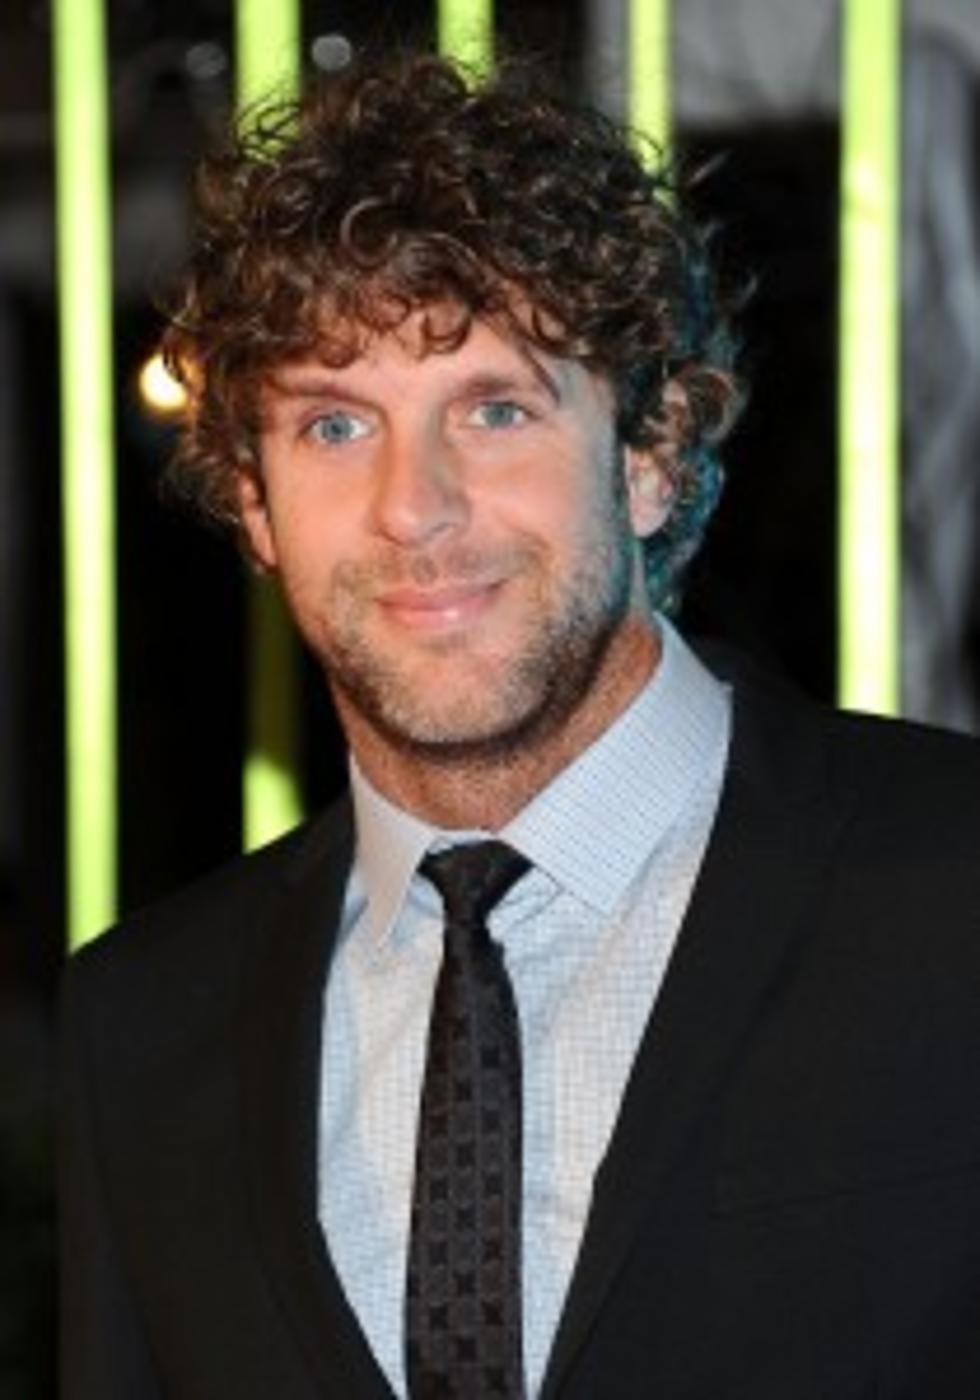 Billy Currington Indicted For Terroristic Threats